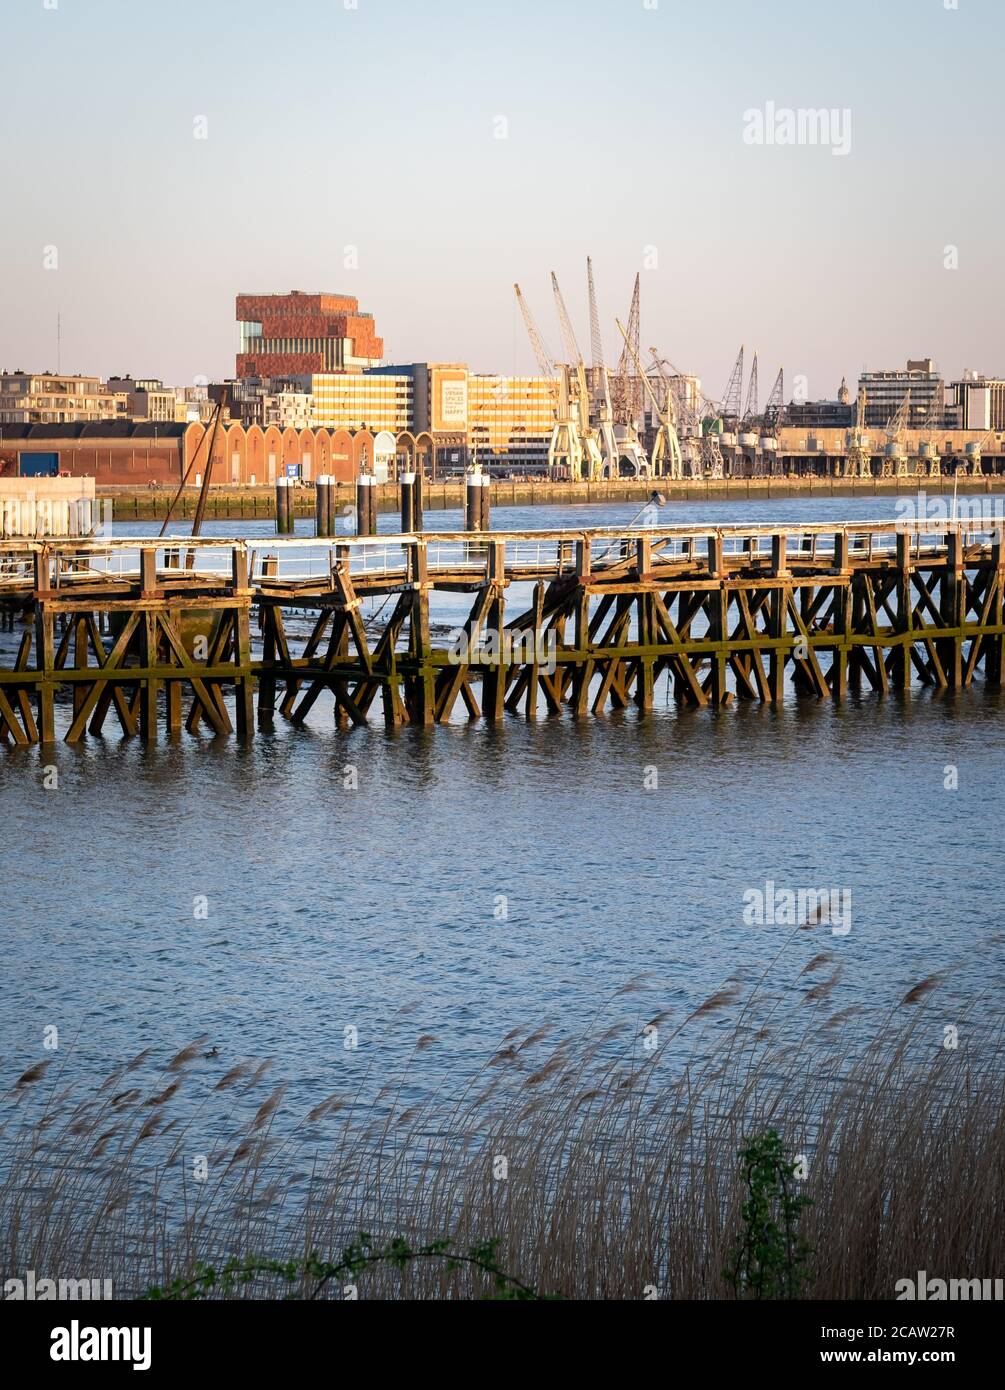 Old wooden pier in front of the Northern part of the city of Antwerp, Belgium Stock Photo